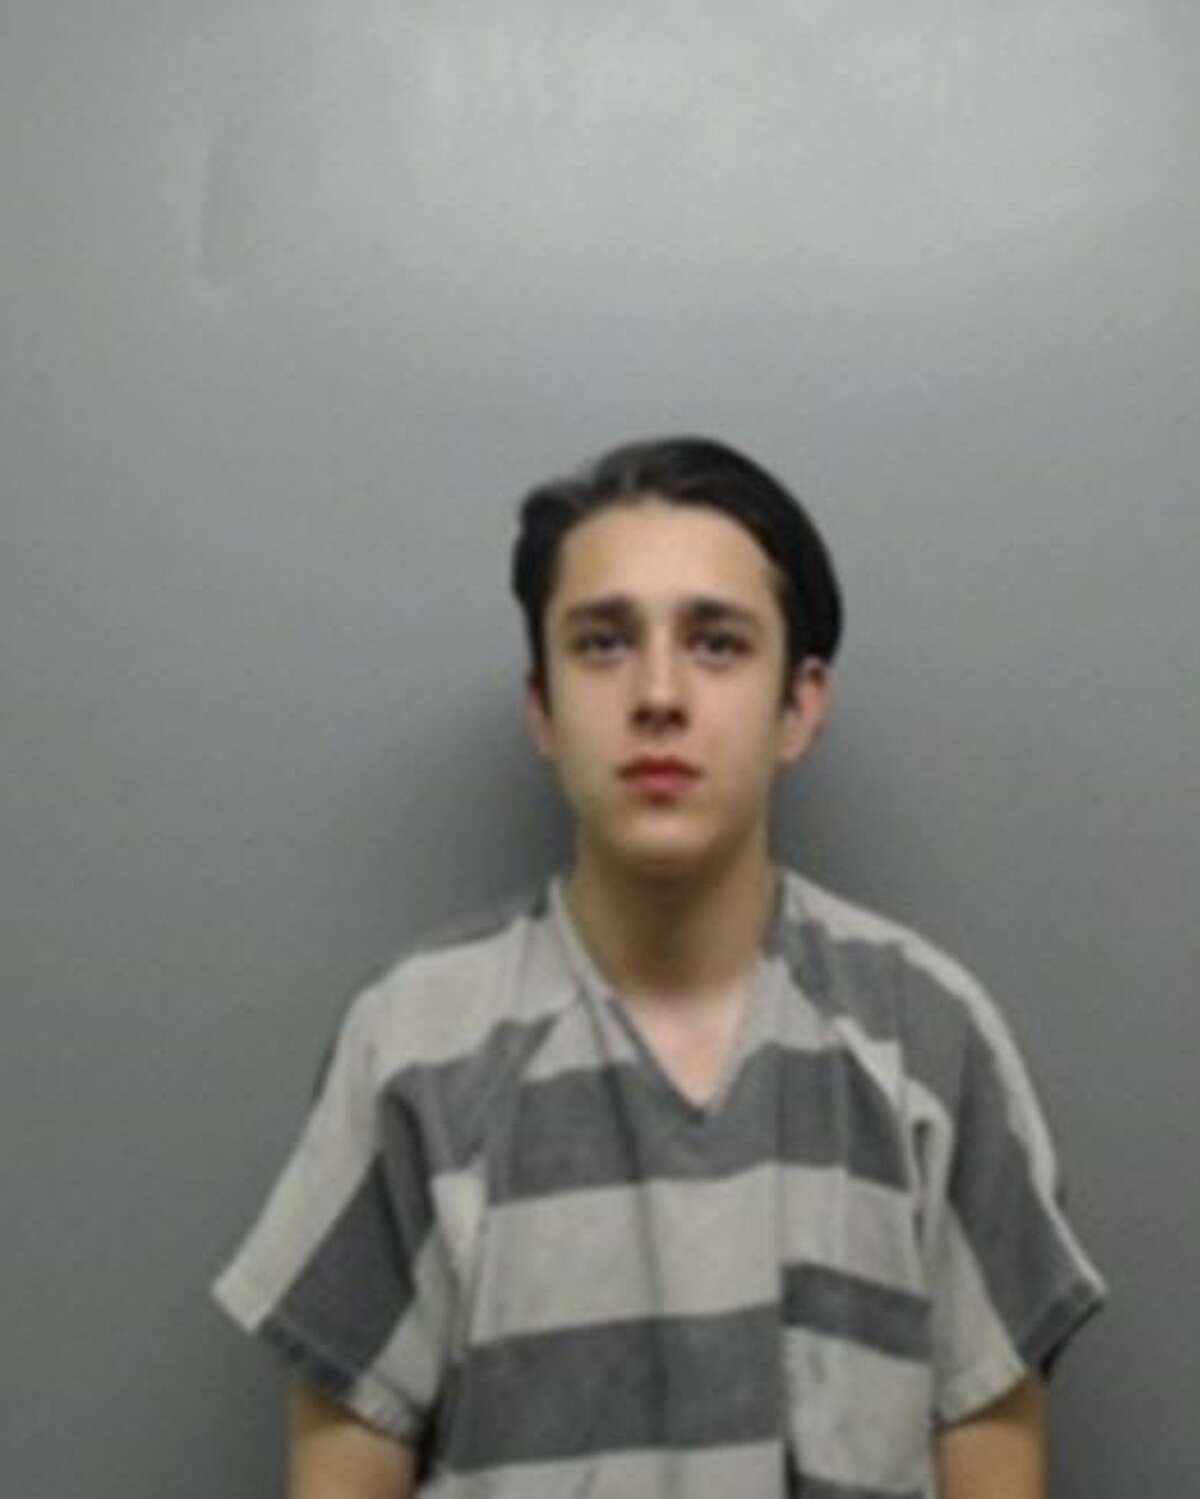 Sean Zachary Jacaman, 21, was charged with aggravated assault with a deadly weapon.